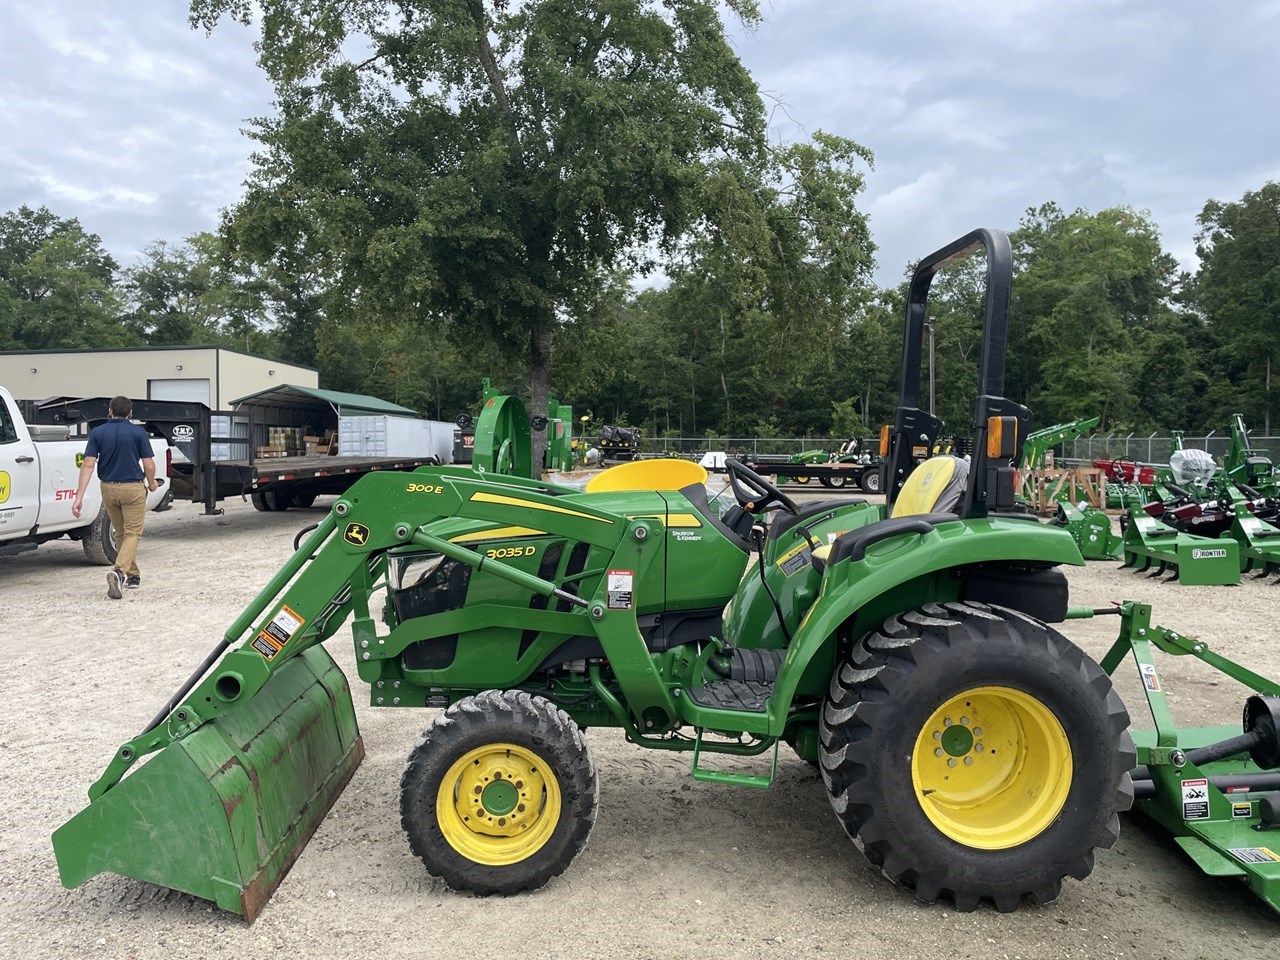 2019 John Deere 3035D Tractor - Compact Utility For Sale